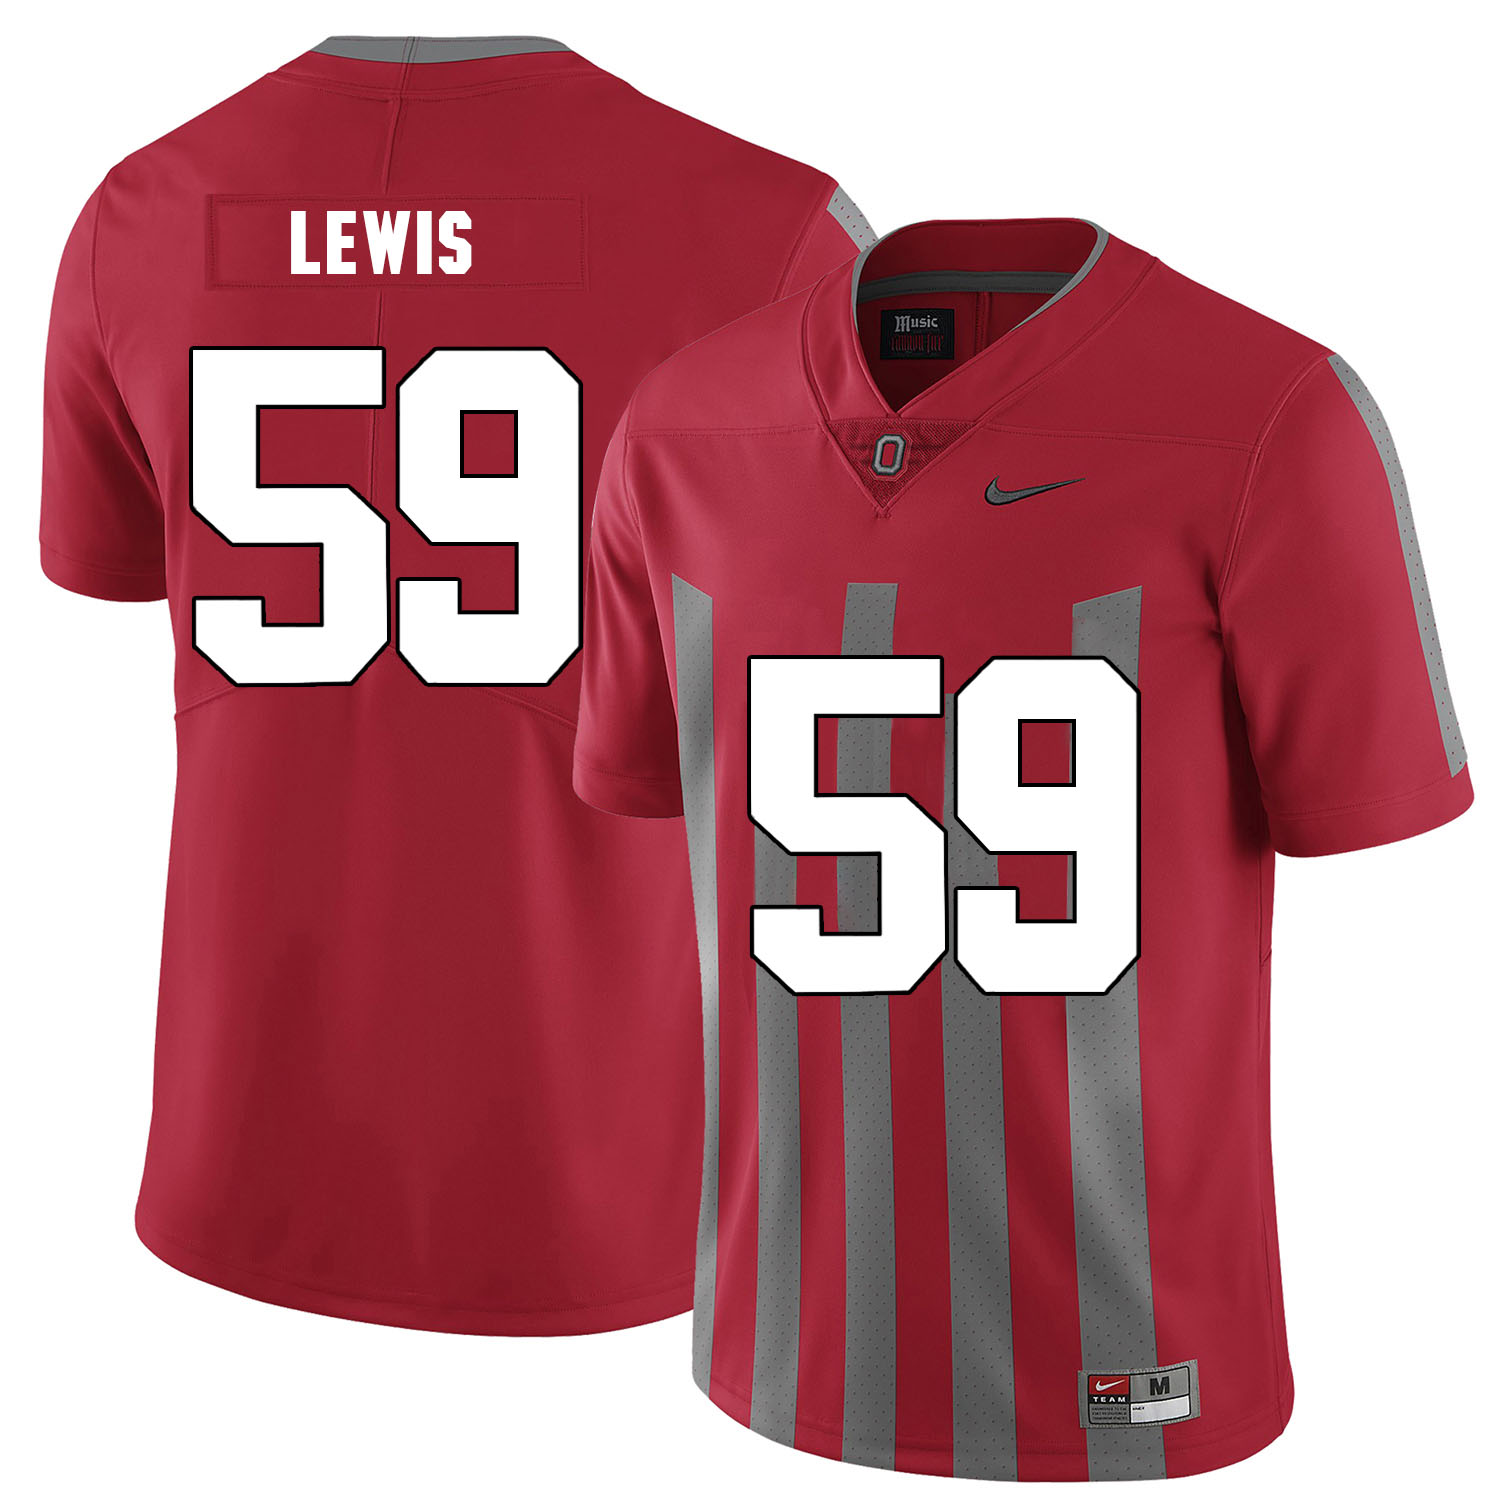 Ohio State Buckeyes 59 Tyquan Lewis Red Elite Nike College Football Jersey